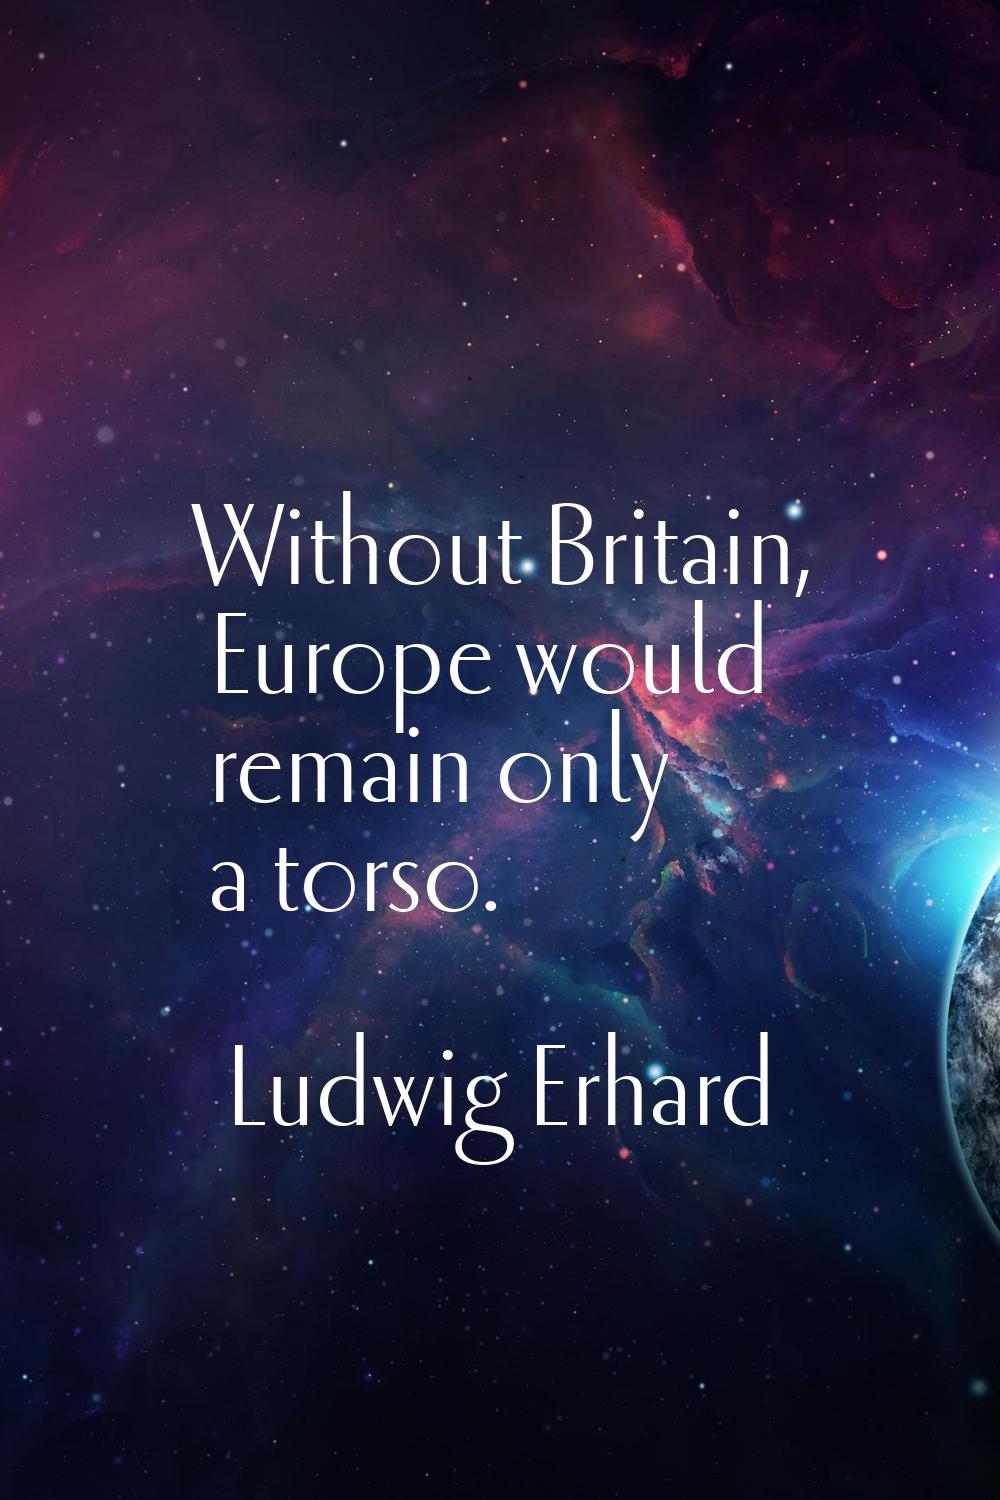 Without Britain, Europe would remain only a torso.